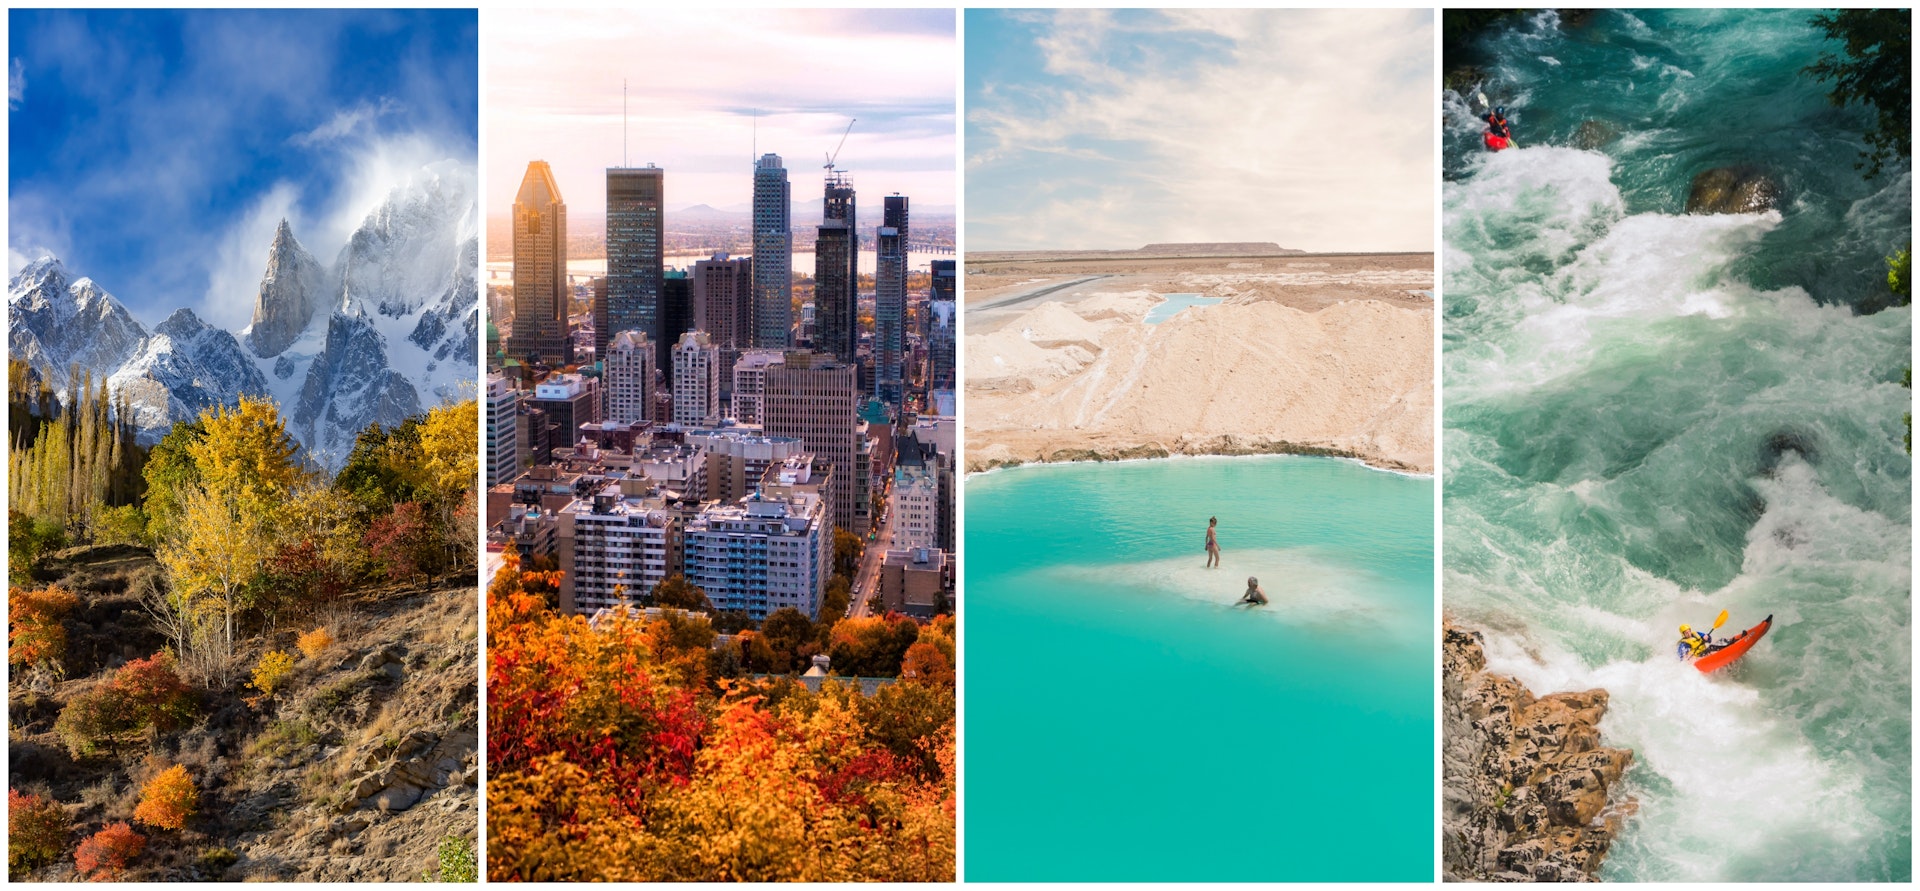 Autumn leaves in Hunza Valley, Pakistan; Downtown Montreal in autumn colors, Beach at the Dead Sea in Egypt; a whitewater rafter in Patagonia